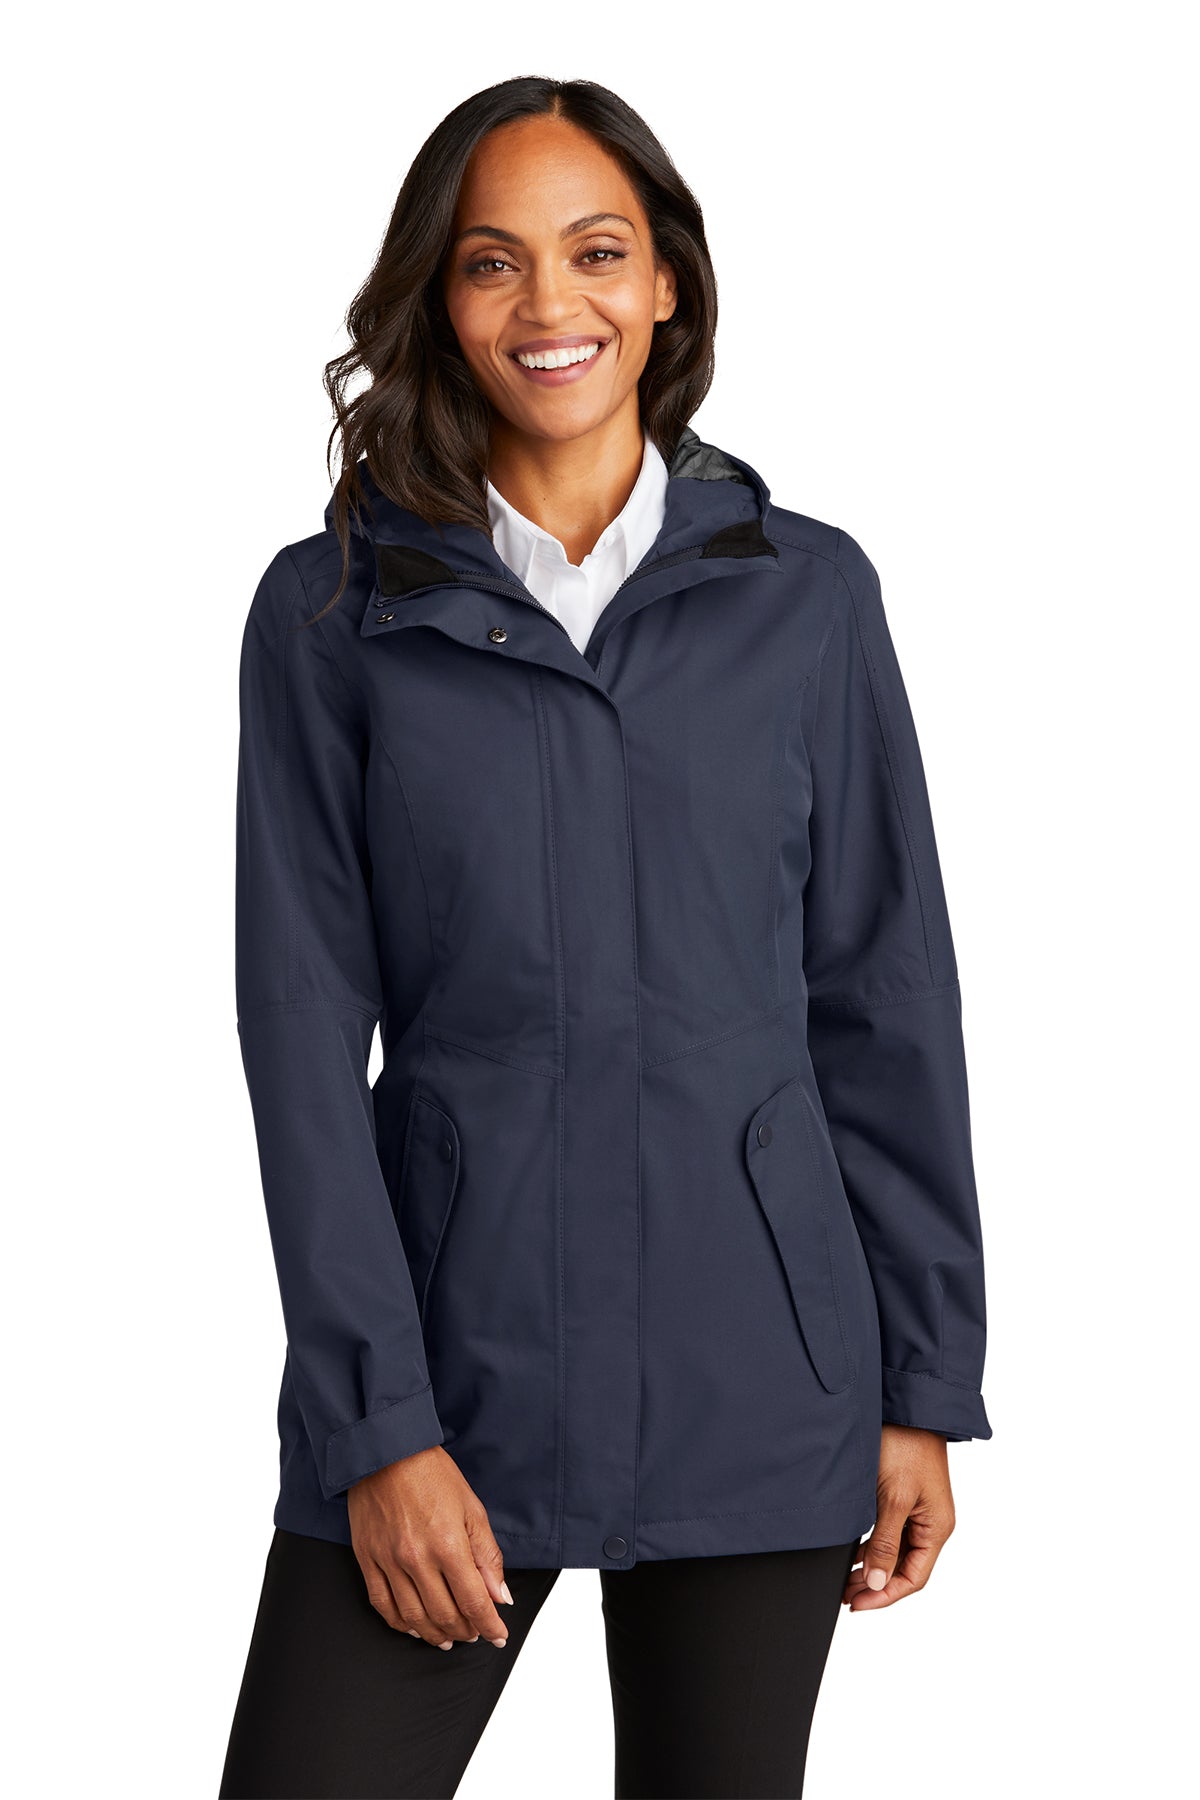 Port Authority ® Ladies Collective Outer Shell Jacket - L900 - Group C